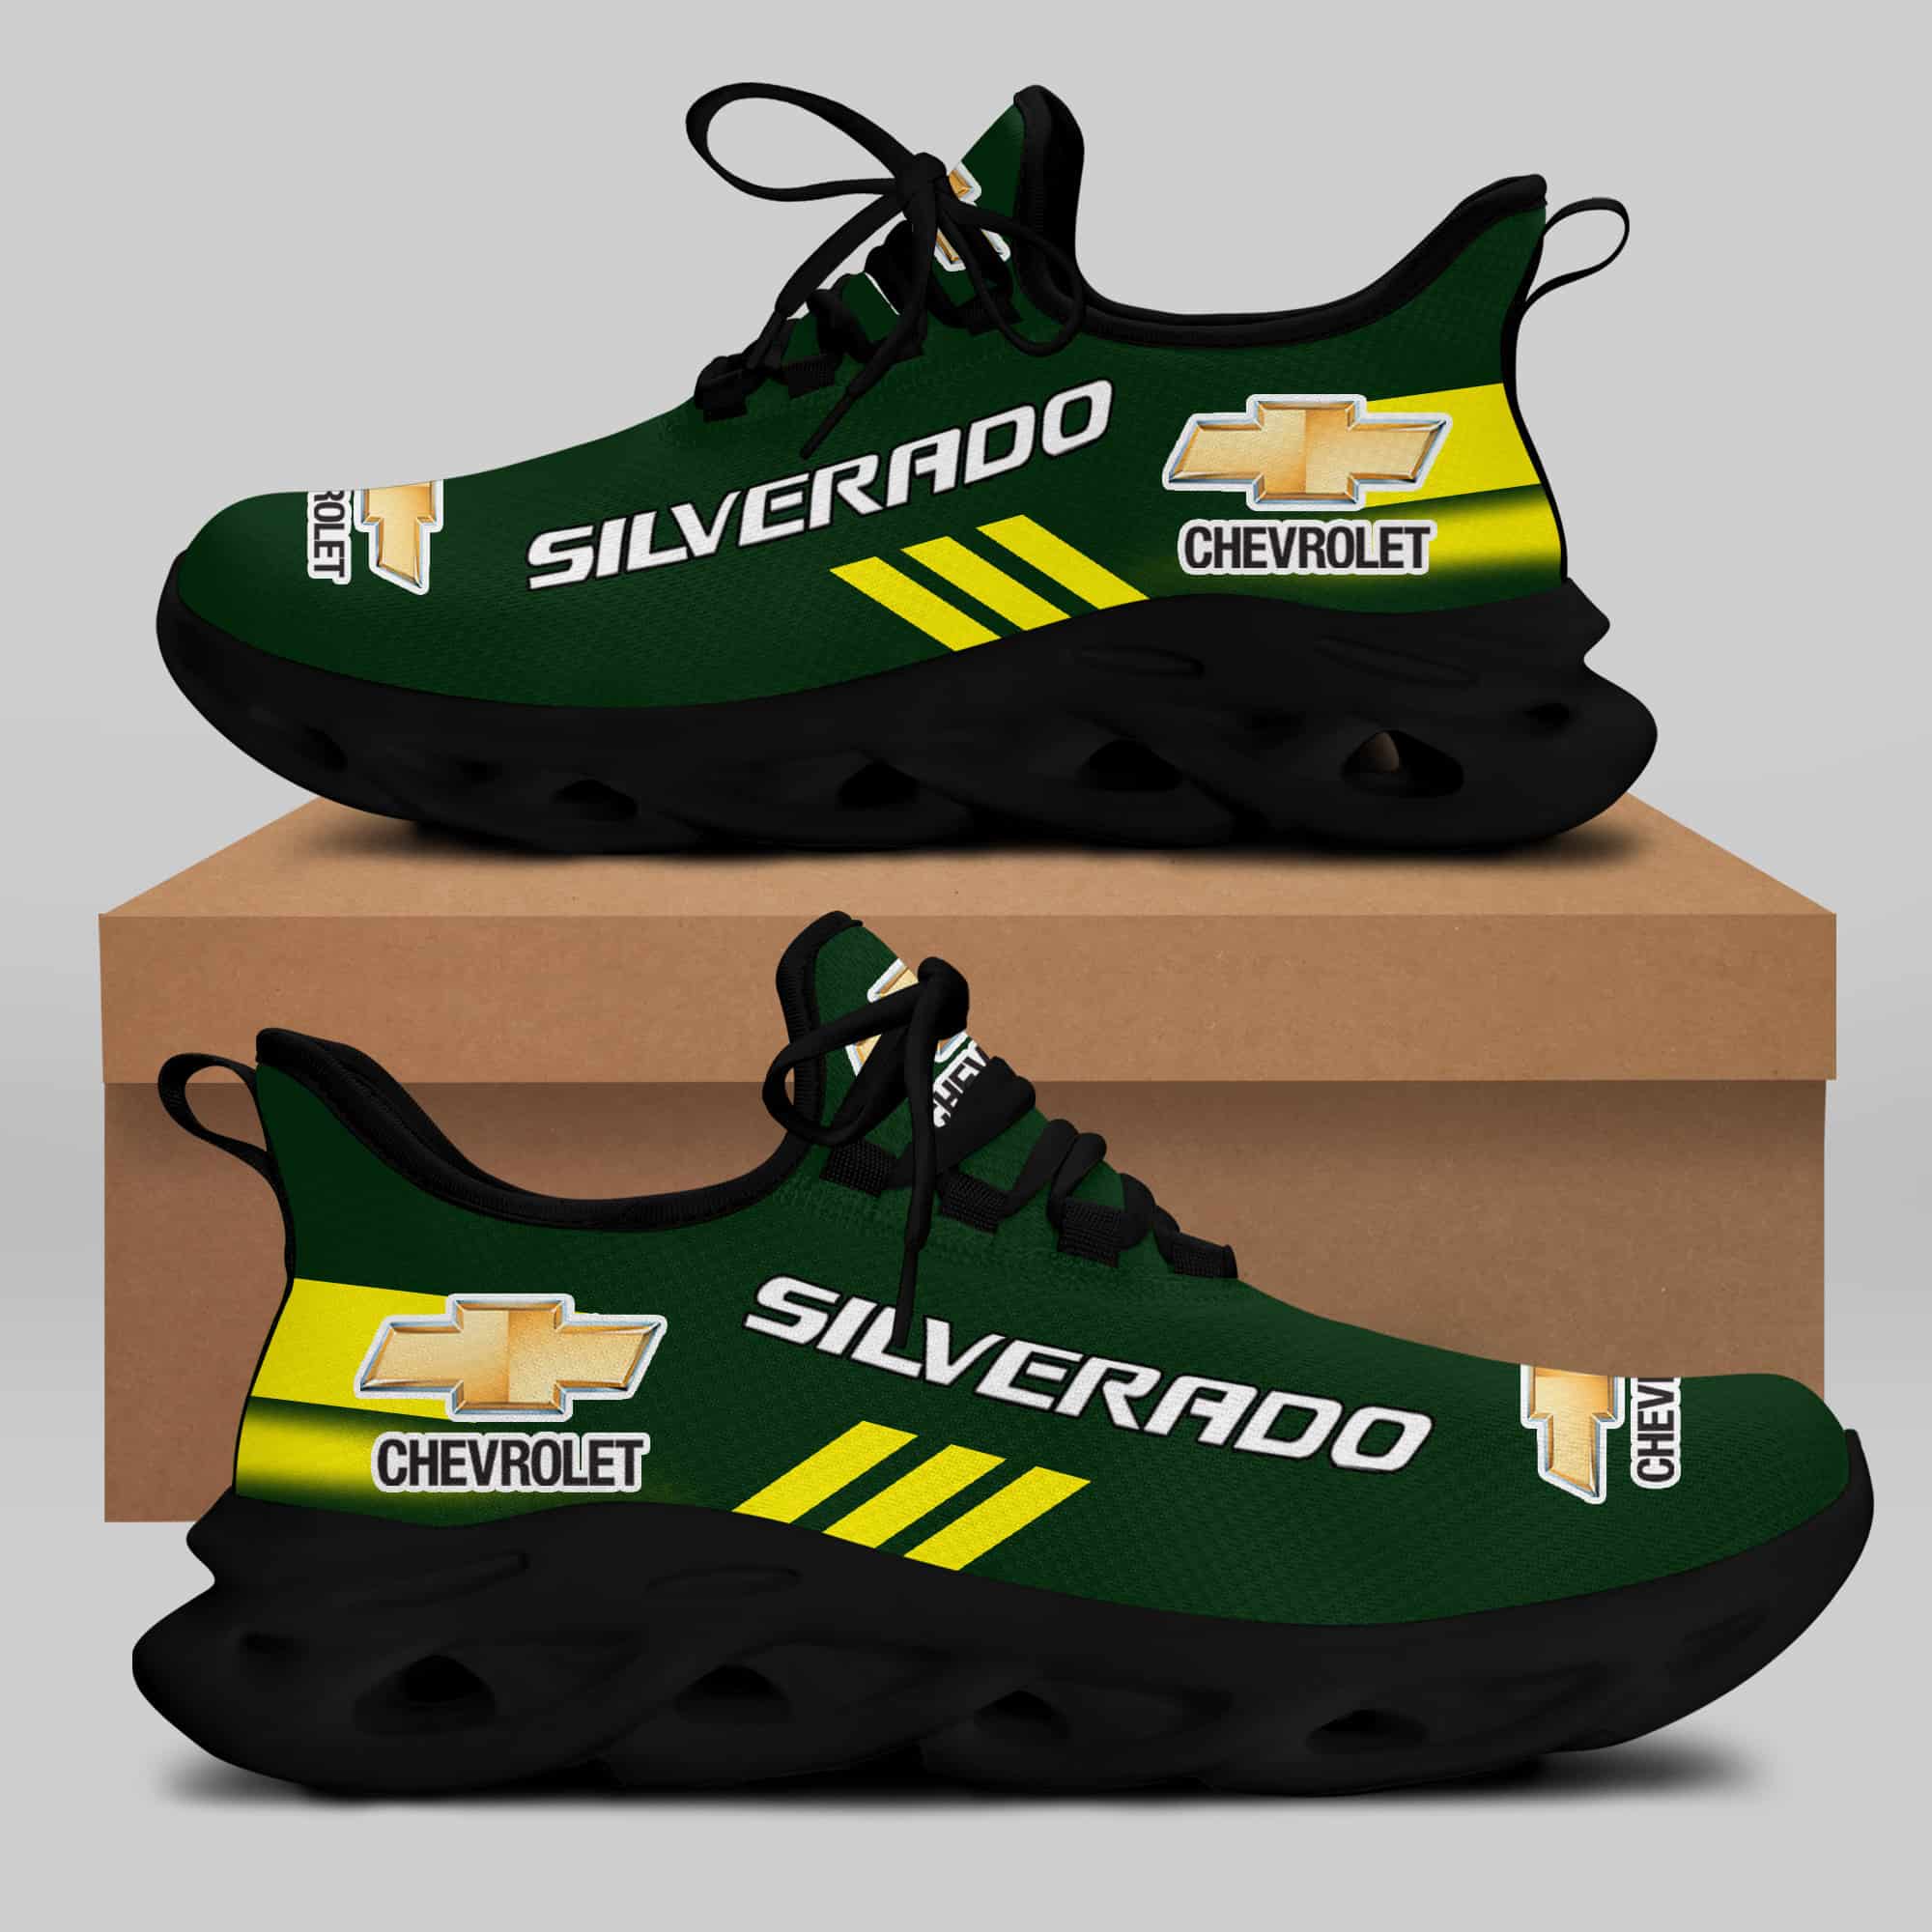 Chevrolet Silverado - Running Shoes Max Soul Shoes Sneakers Ver 7 2